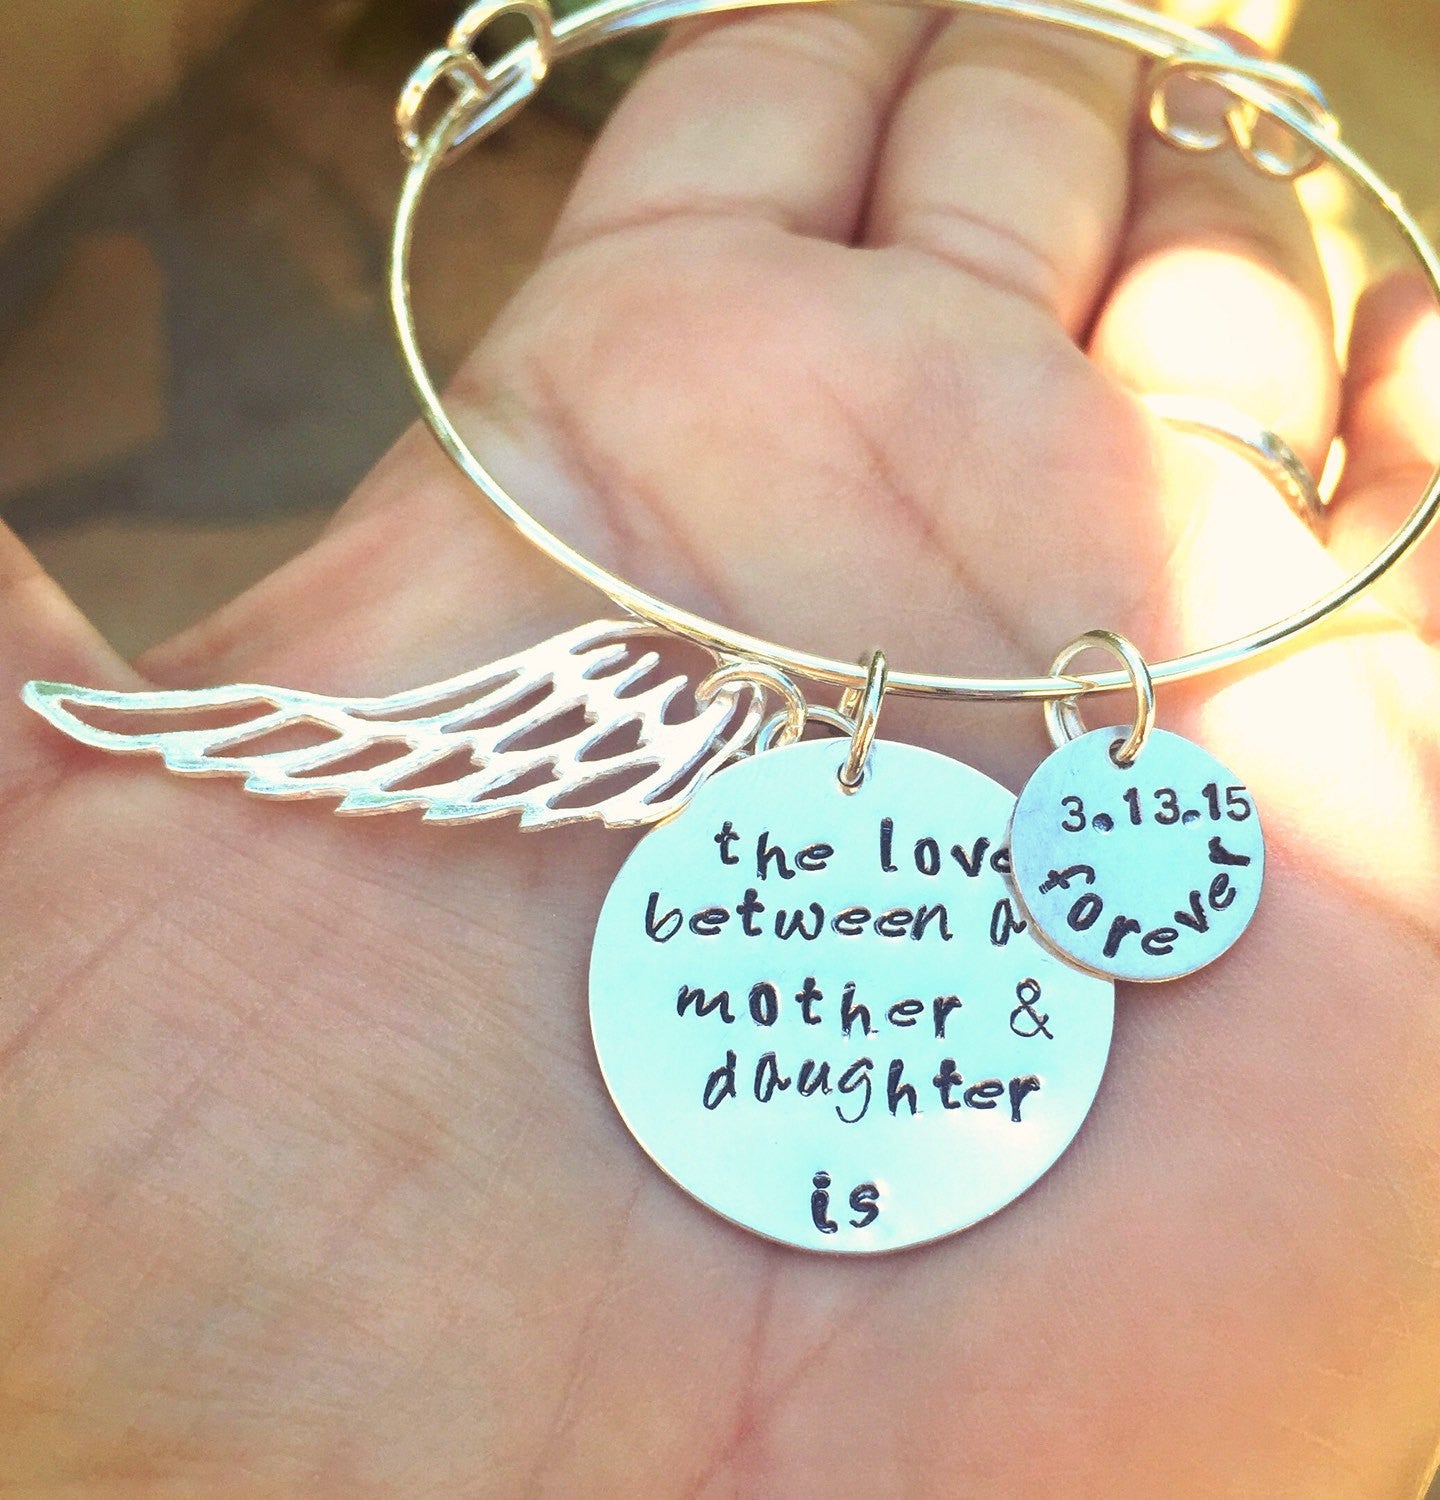 The Love Between A Mother And Daughter Is Forever, Mother Daughter Bracelet, Personalized Bracelets, natashaaloha - Natashaaloha, jewelry, bracelets, necklace, keychains, fishing lures, gifts for men, charms, personalized, 